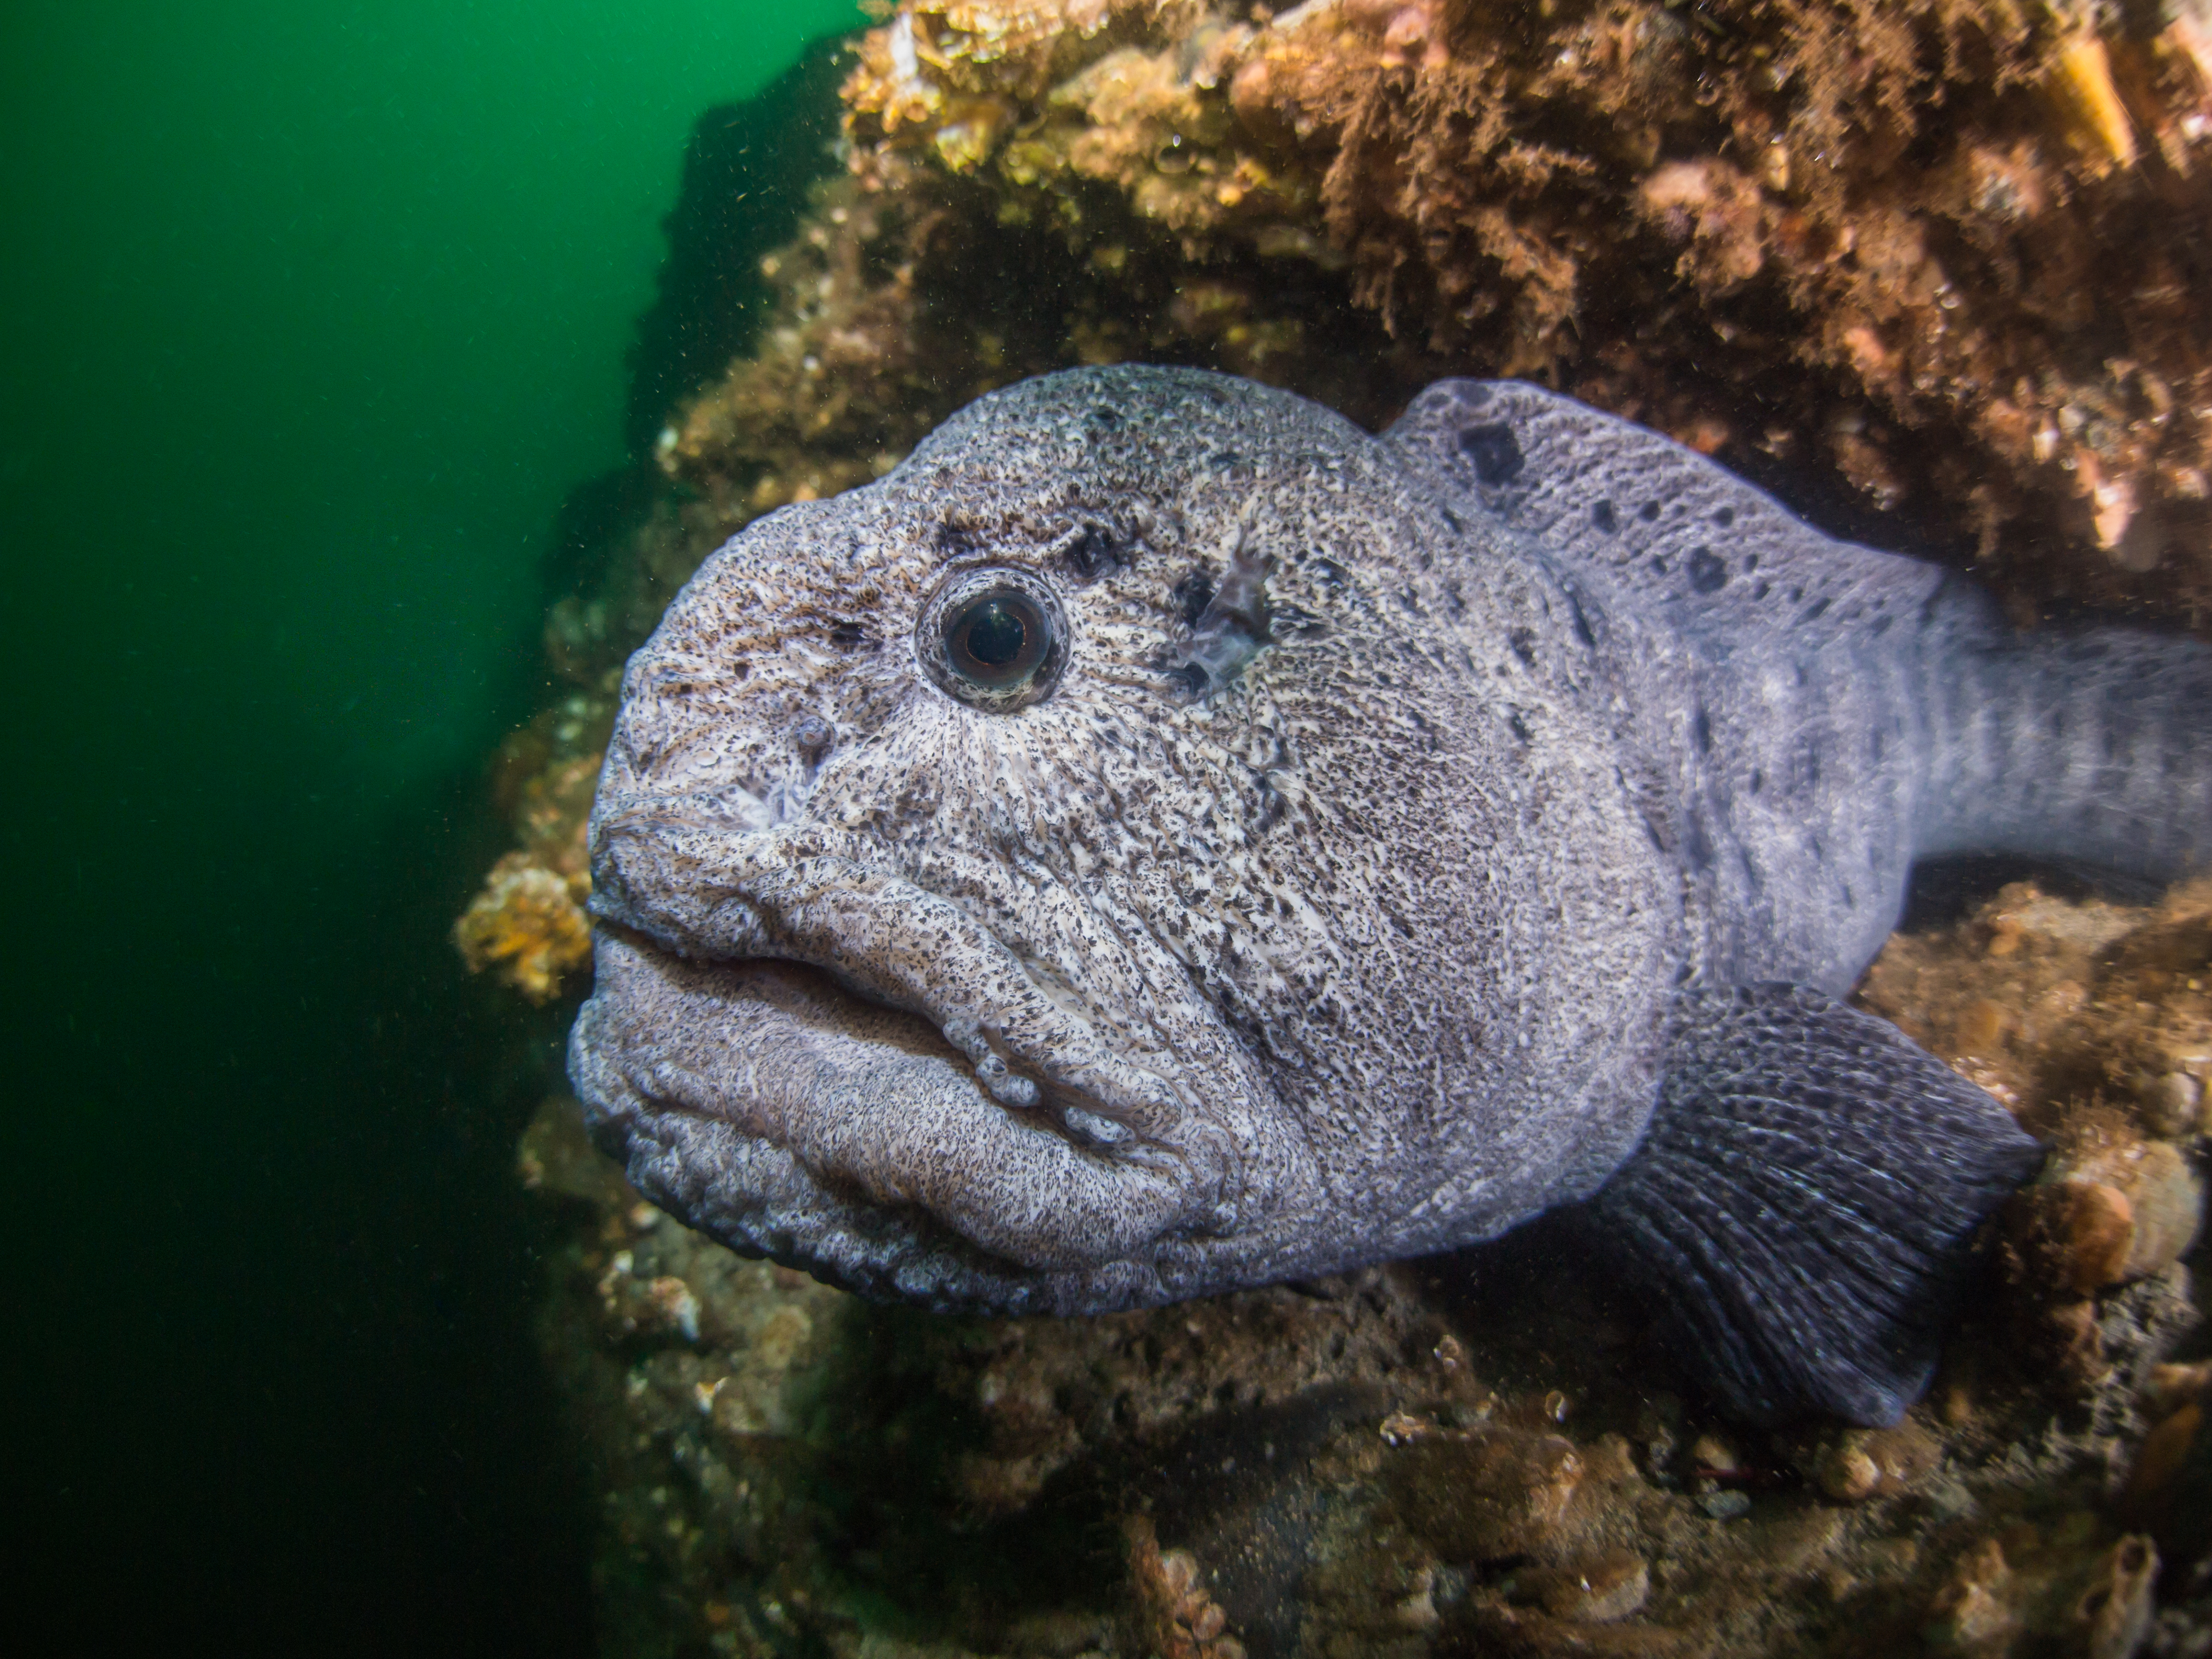 In Search of the World’s Ugliest Fish